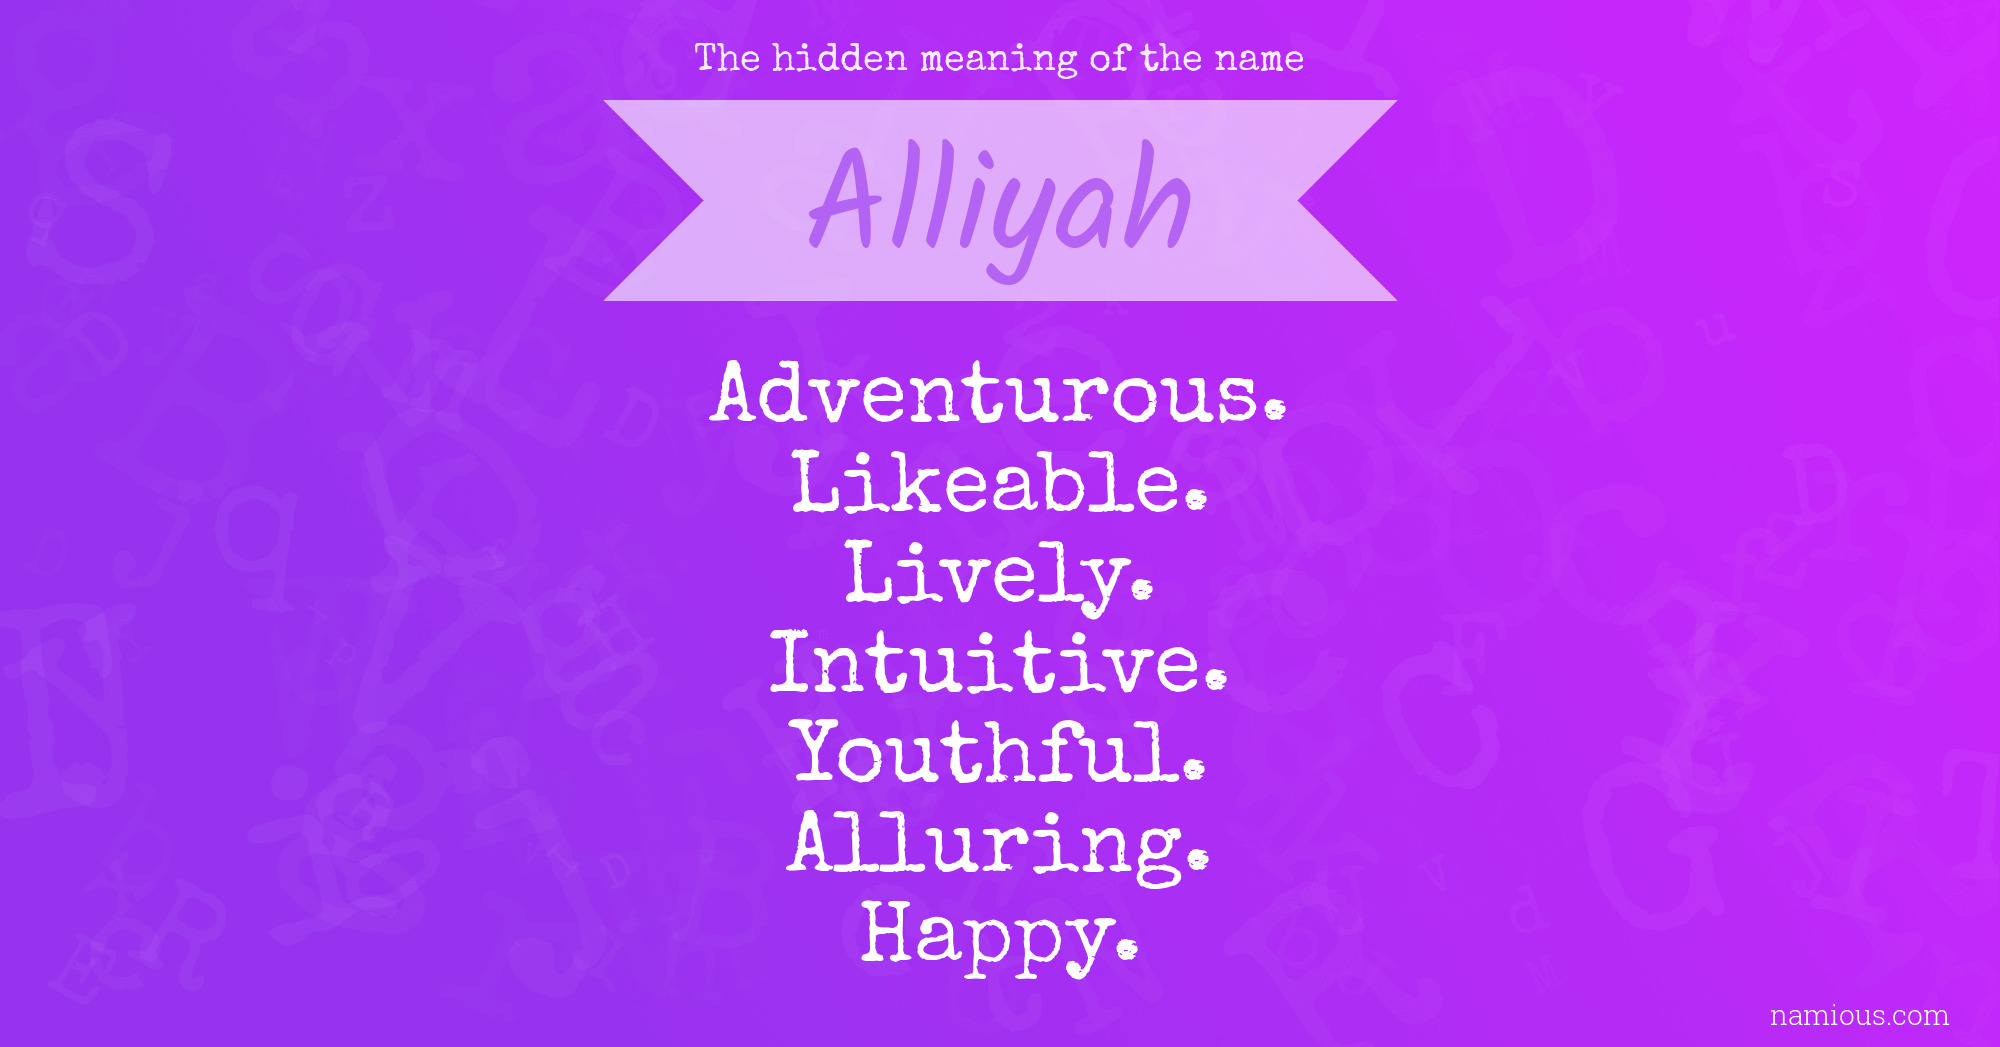 The hidden meaning of the name Alliyah